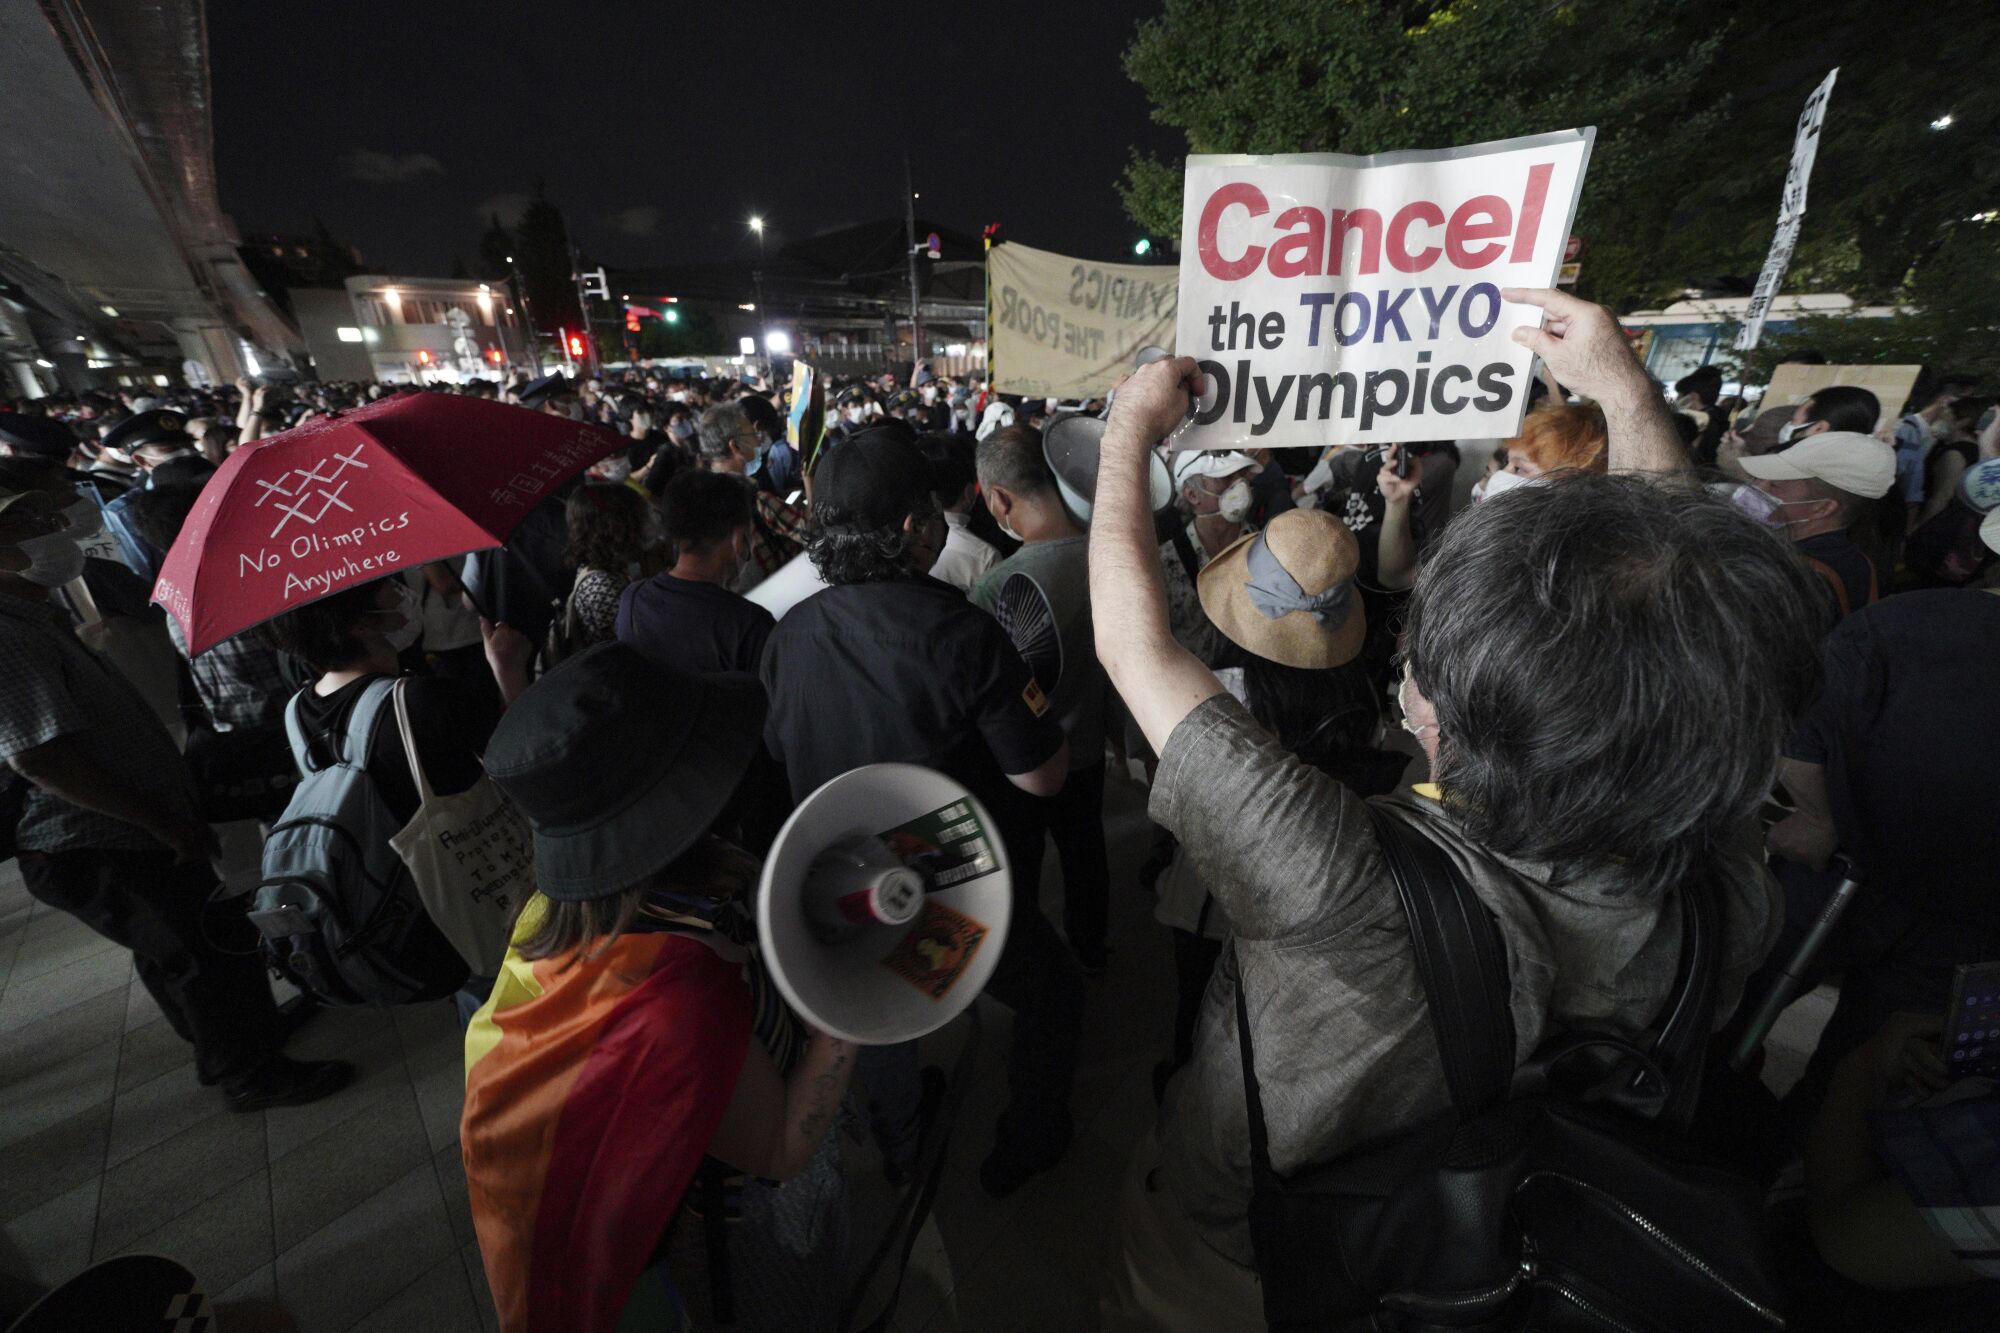 Anti-Olympic protesters demonstrate near the National Stadium in Tokyo.